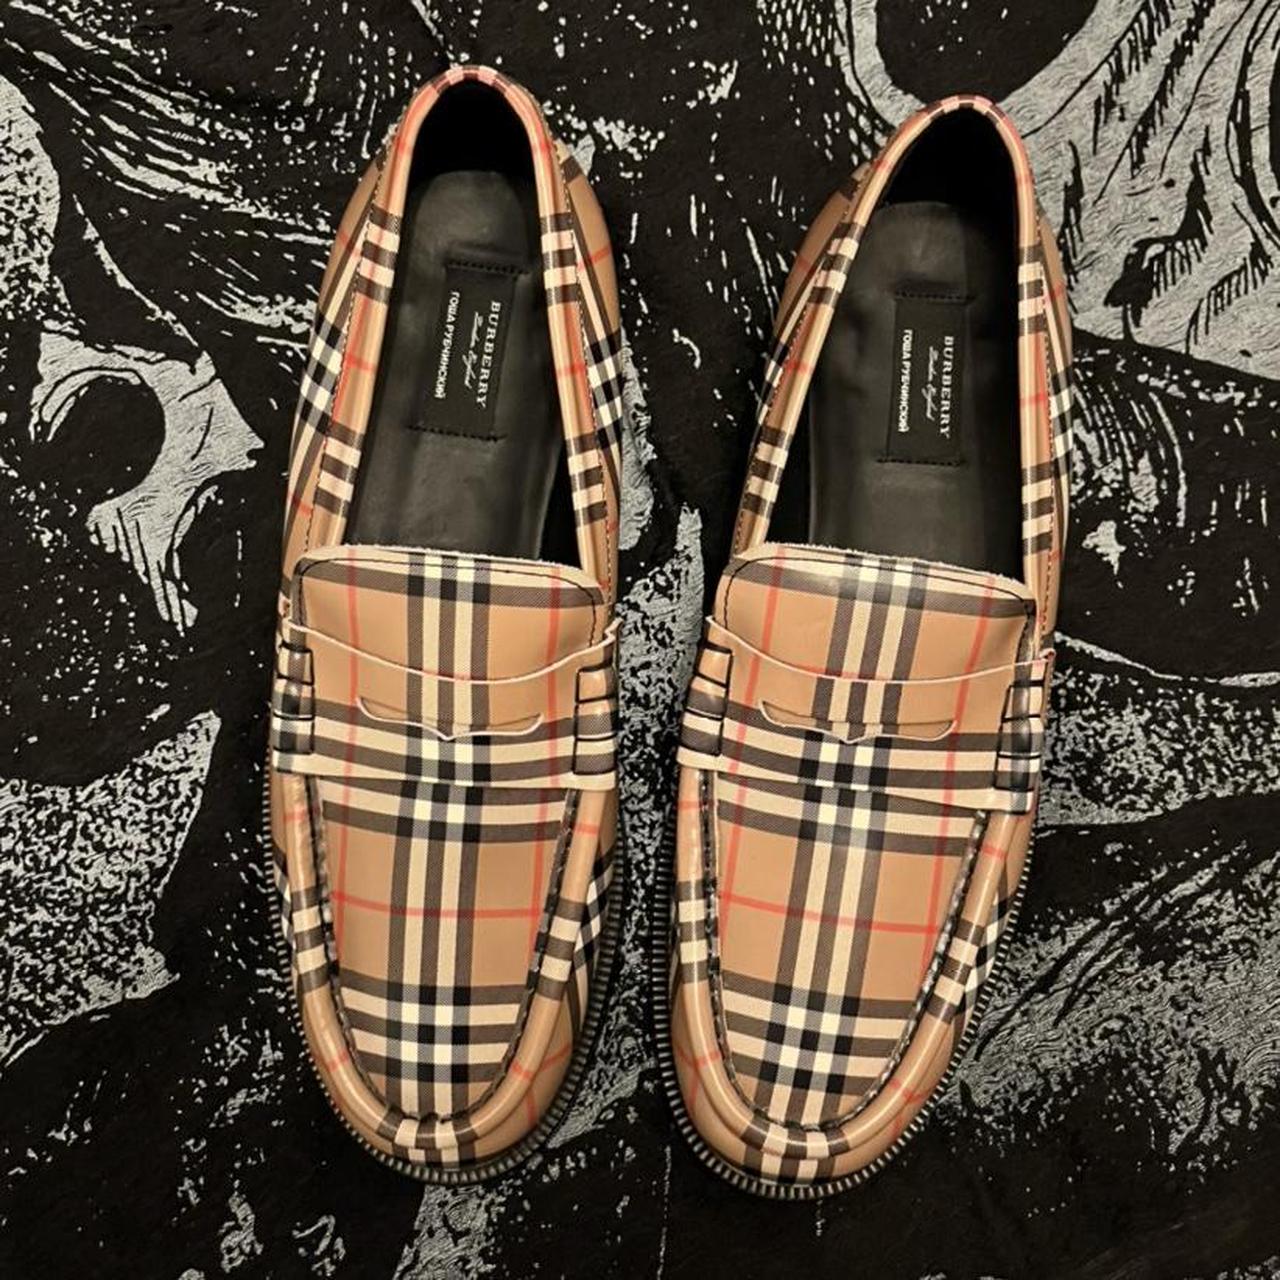 Burberry Men's Tan and Black Loafers | Depop